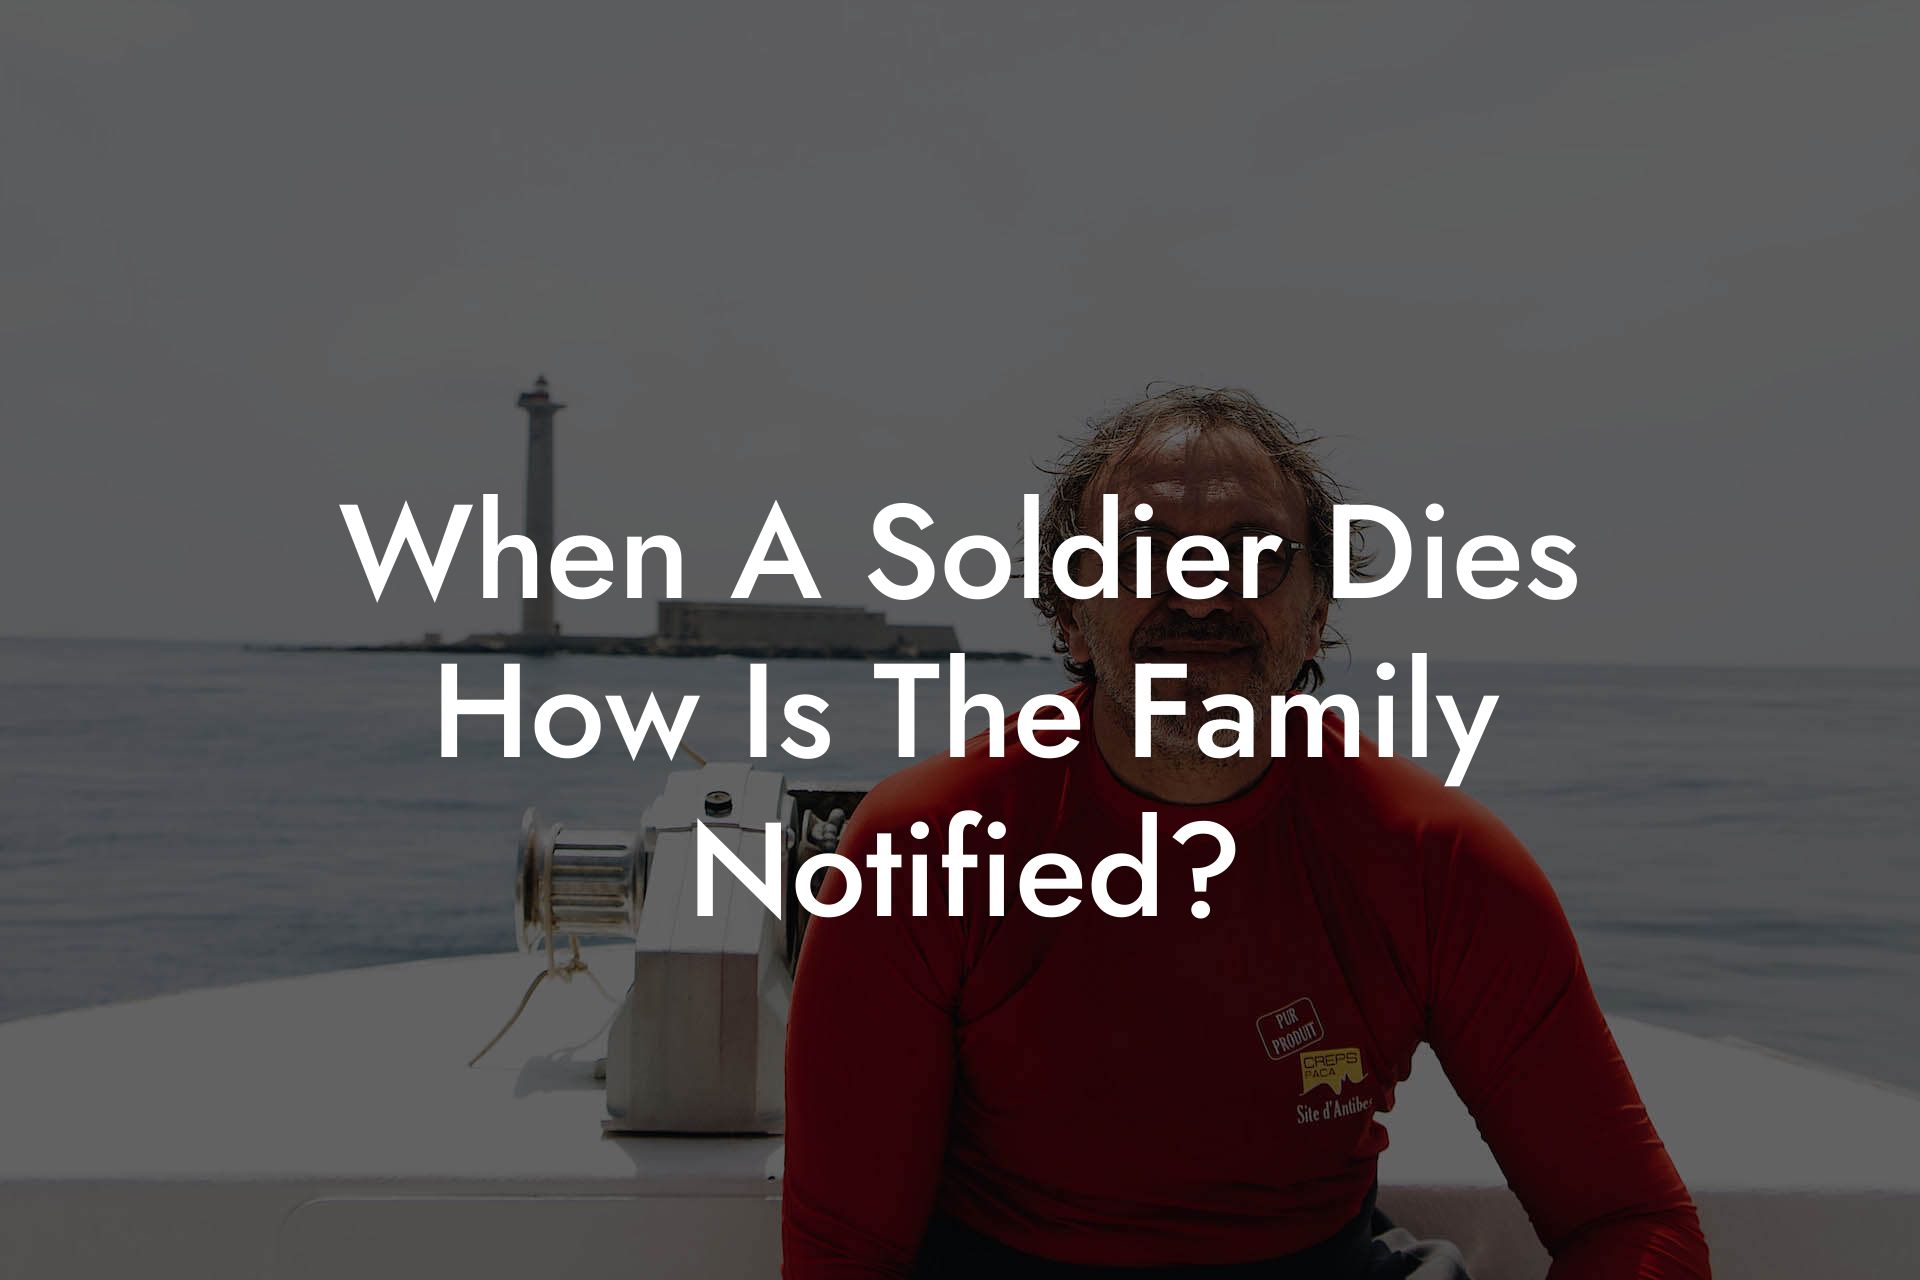 When A Soldier Dies How Is The Family Notified?